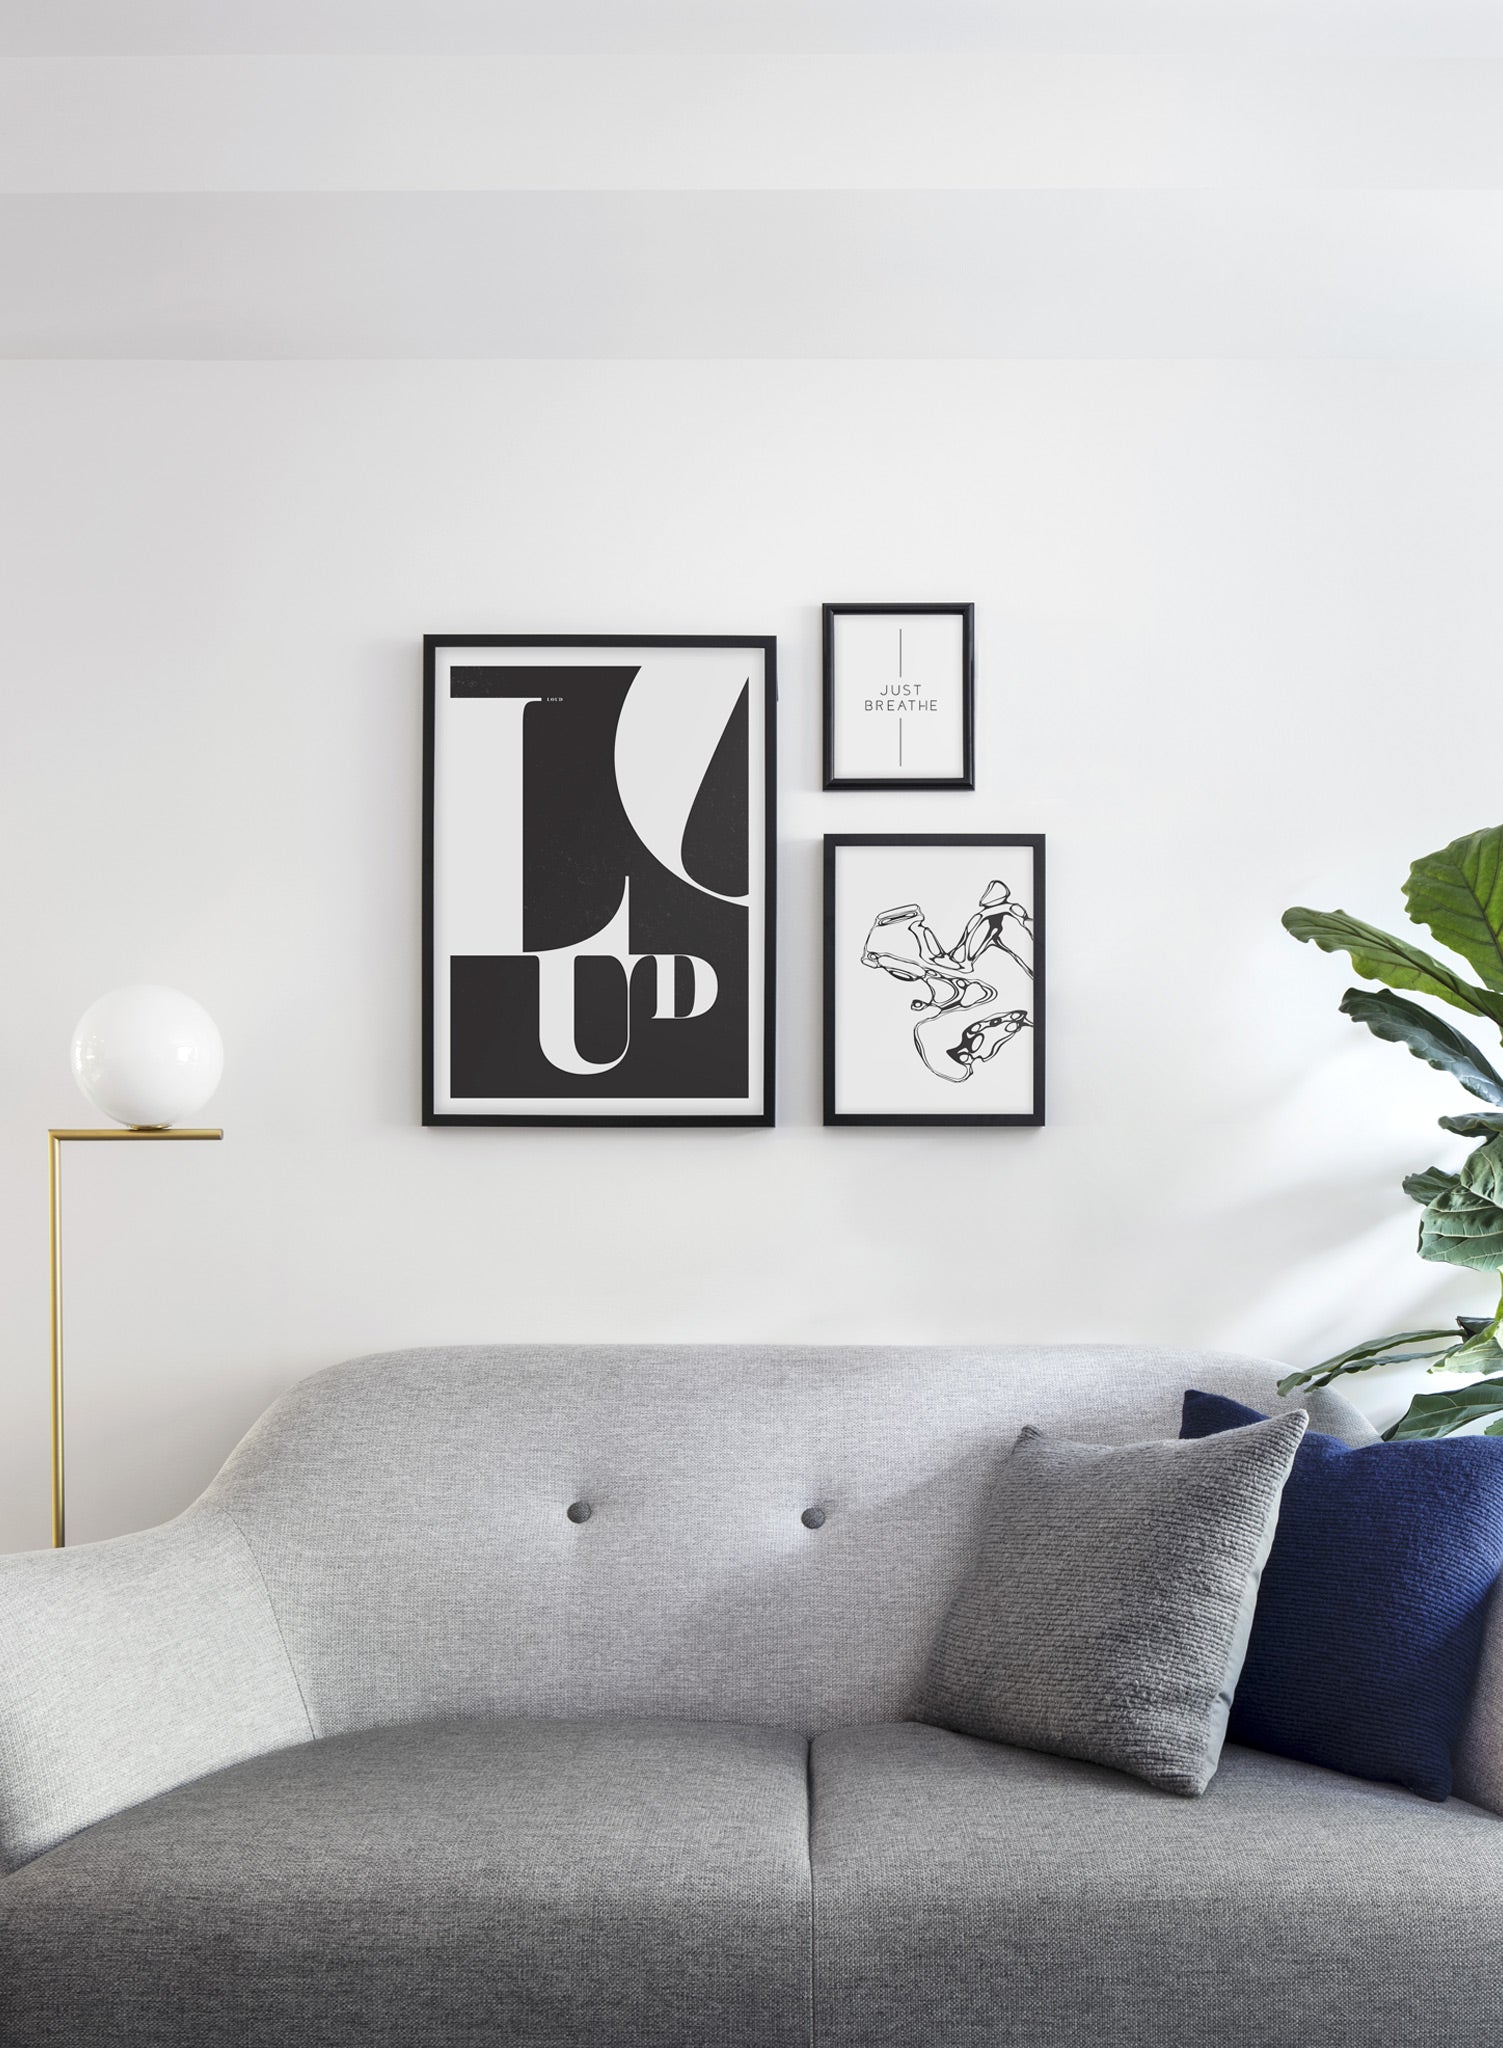 Minimalist poster by Opposite Wall with trendy black and white abstract graphic design - Organic No.1 - Living room sofa